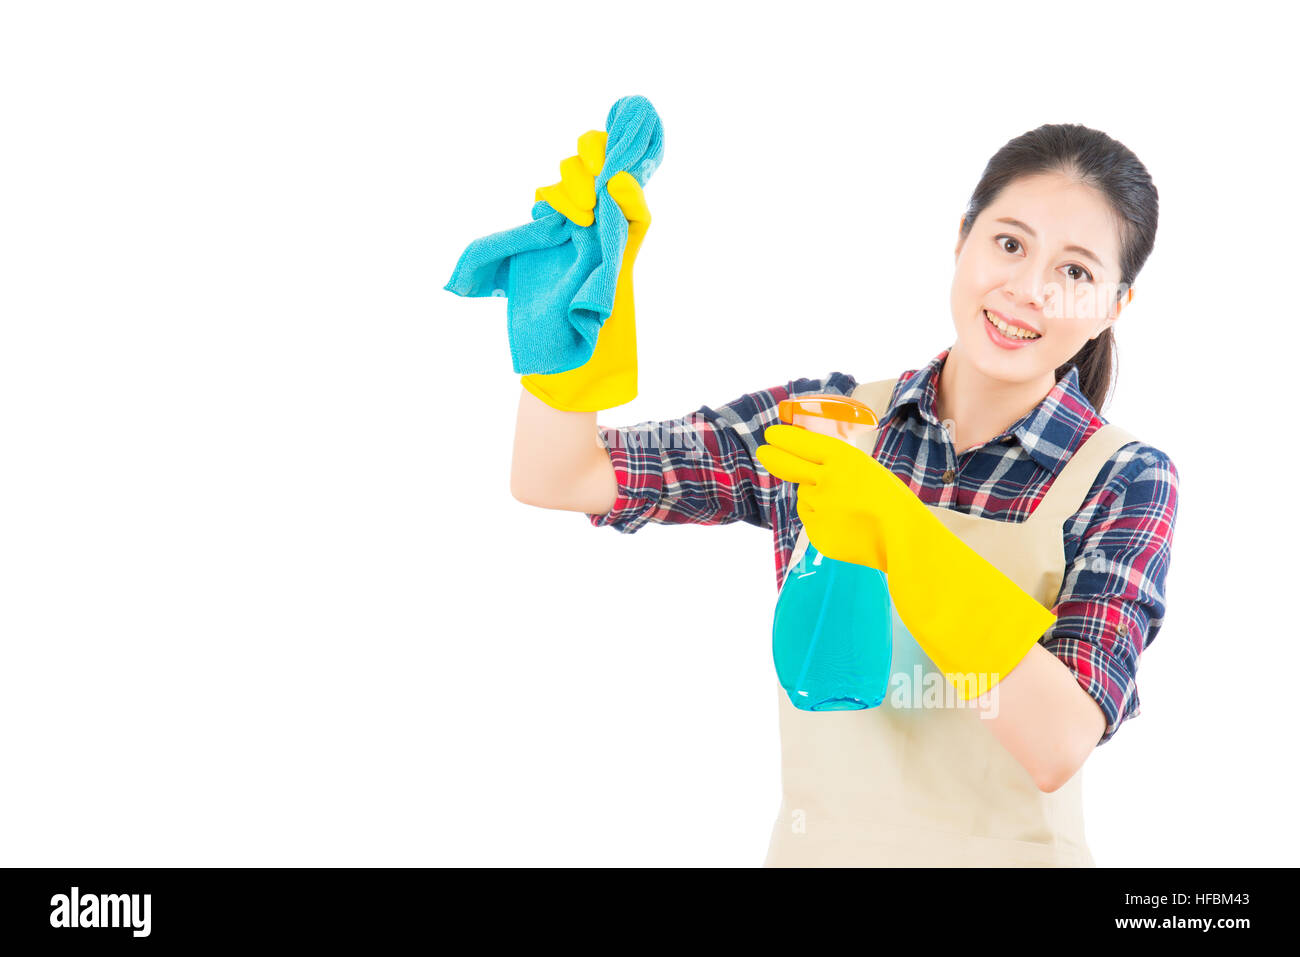 Housewife cleaning using the rag and bottle spray with rubber gloves. Pretty smiling young mixed race Asian girl isolated on white background. Stock Photo